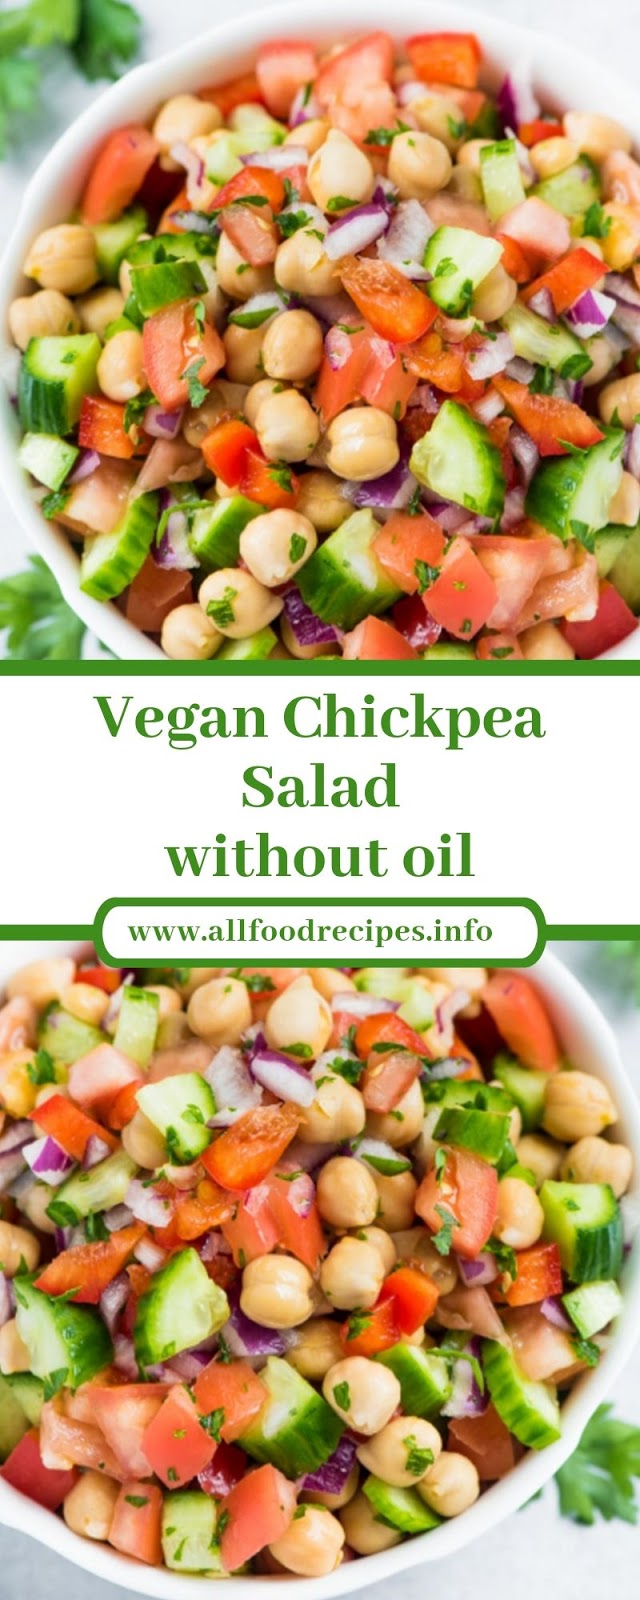 Vegan Chickpea Salad without oil